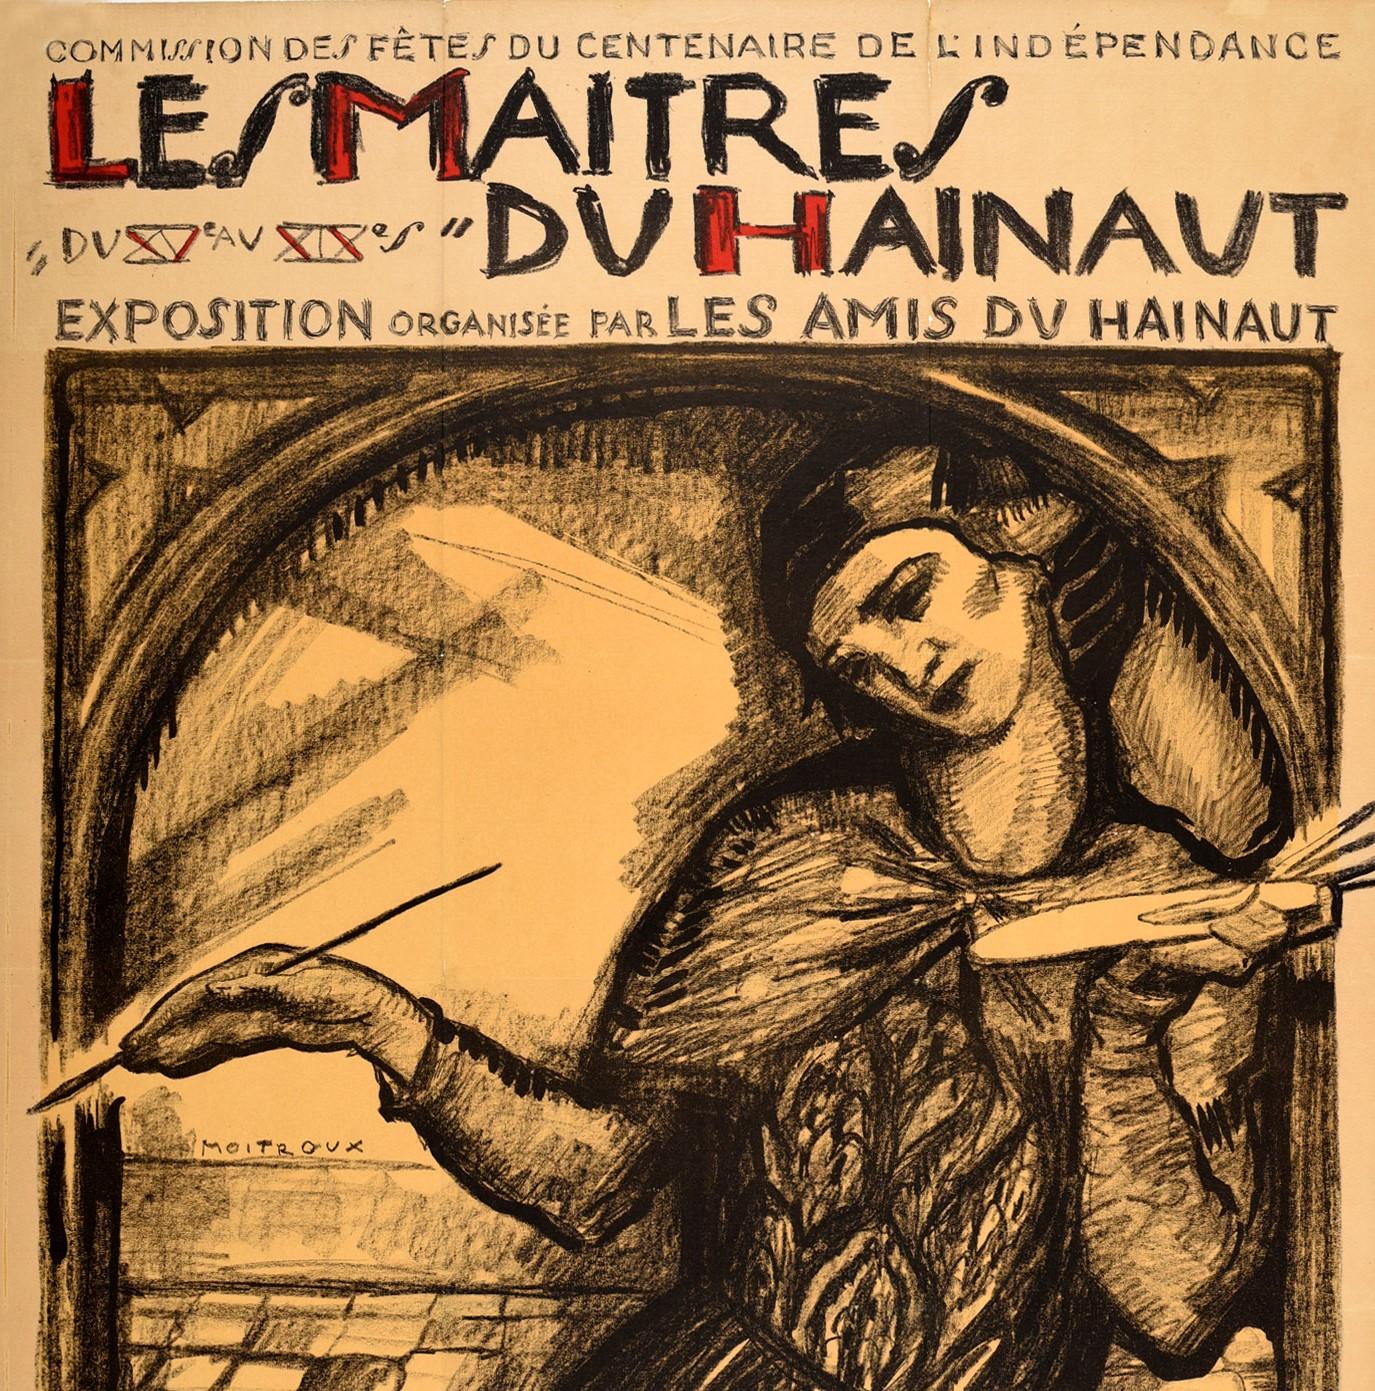 Original vintage poster advertising an art exhibition Les Maitres du Hainaut / The Masters of Hainaut at the Museum of Fine Arts Mons Belgium organised by the Friends of Hainaut featuring artwork by Alfred Moitroux (1886-1938) depicting an artist